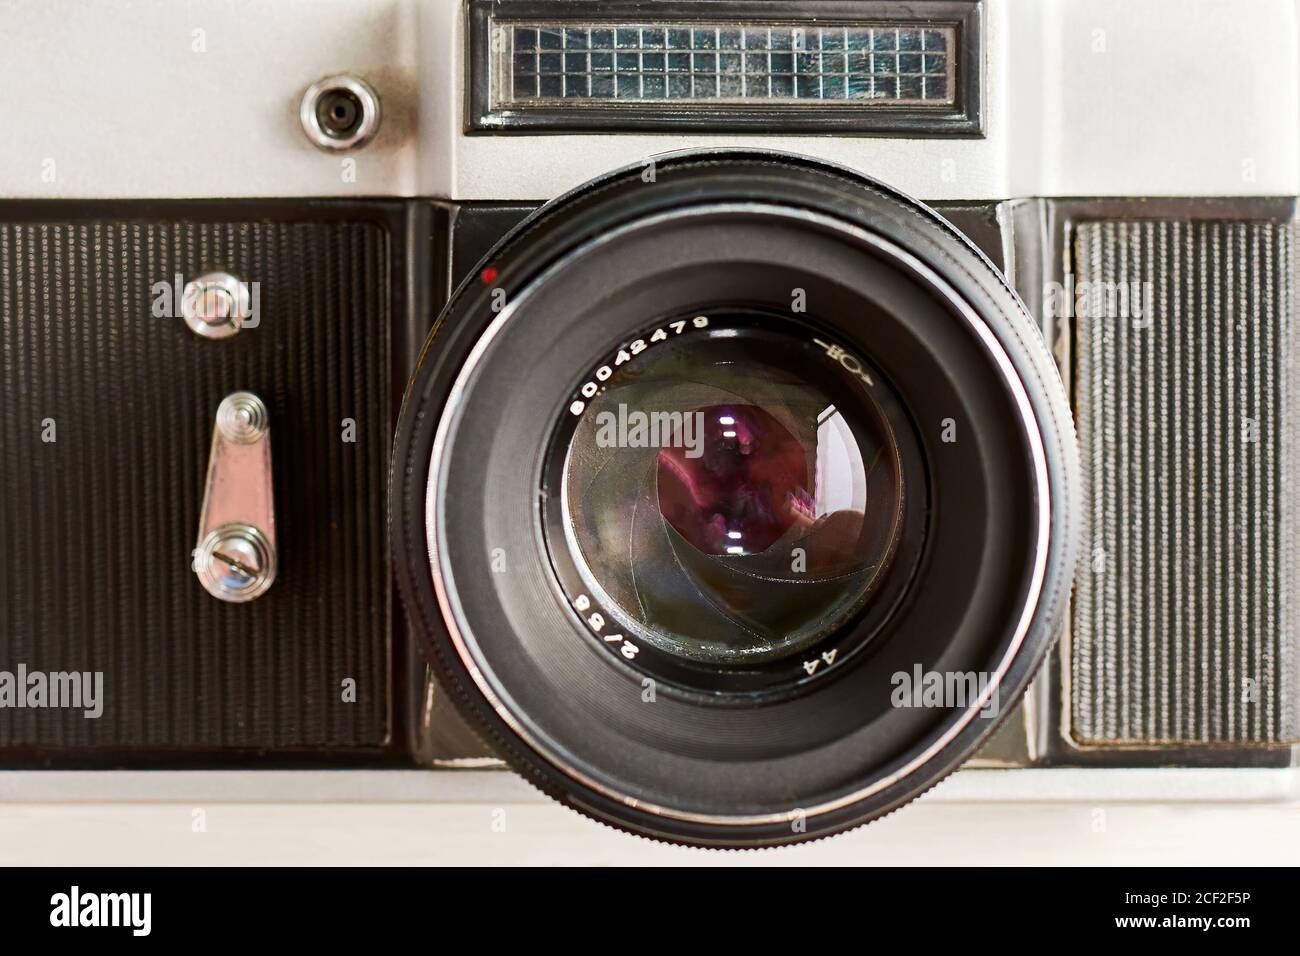 Vintage photo camera with optical lens and aperture blades, front view as icon. Old retro devices backgrounds Stock Photo